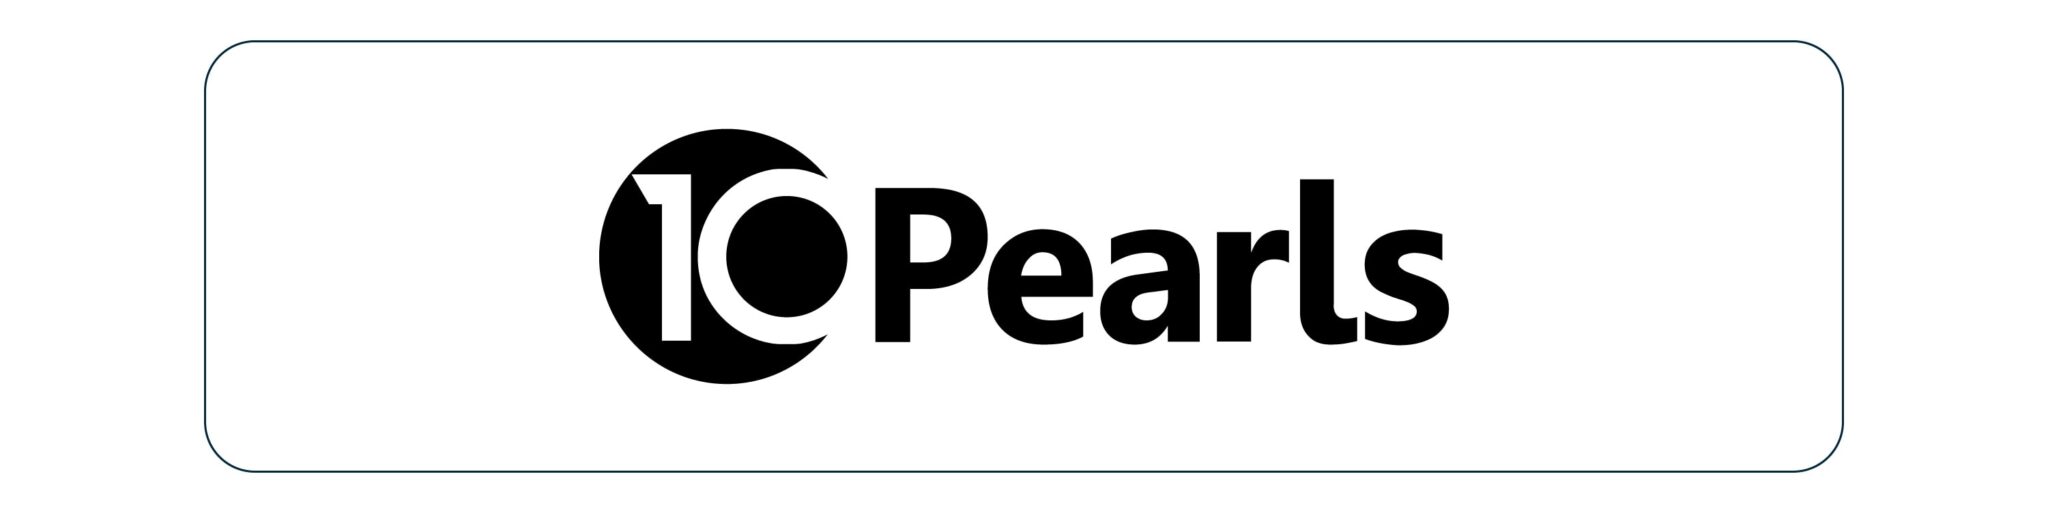 10Pearls is the best SaaS development company on the US market